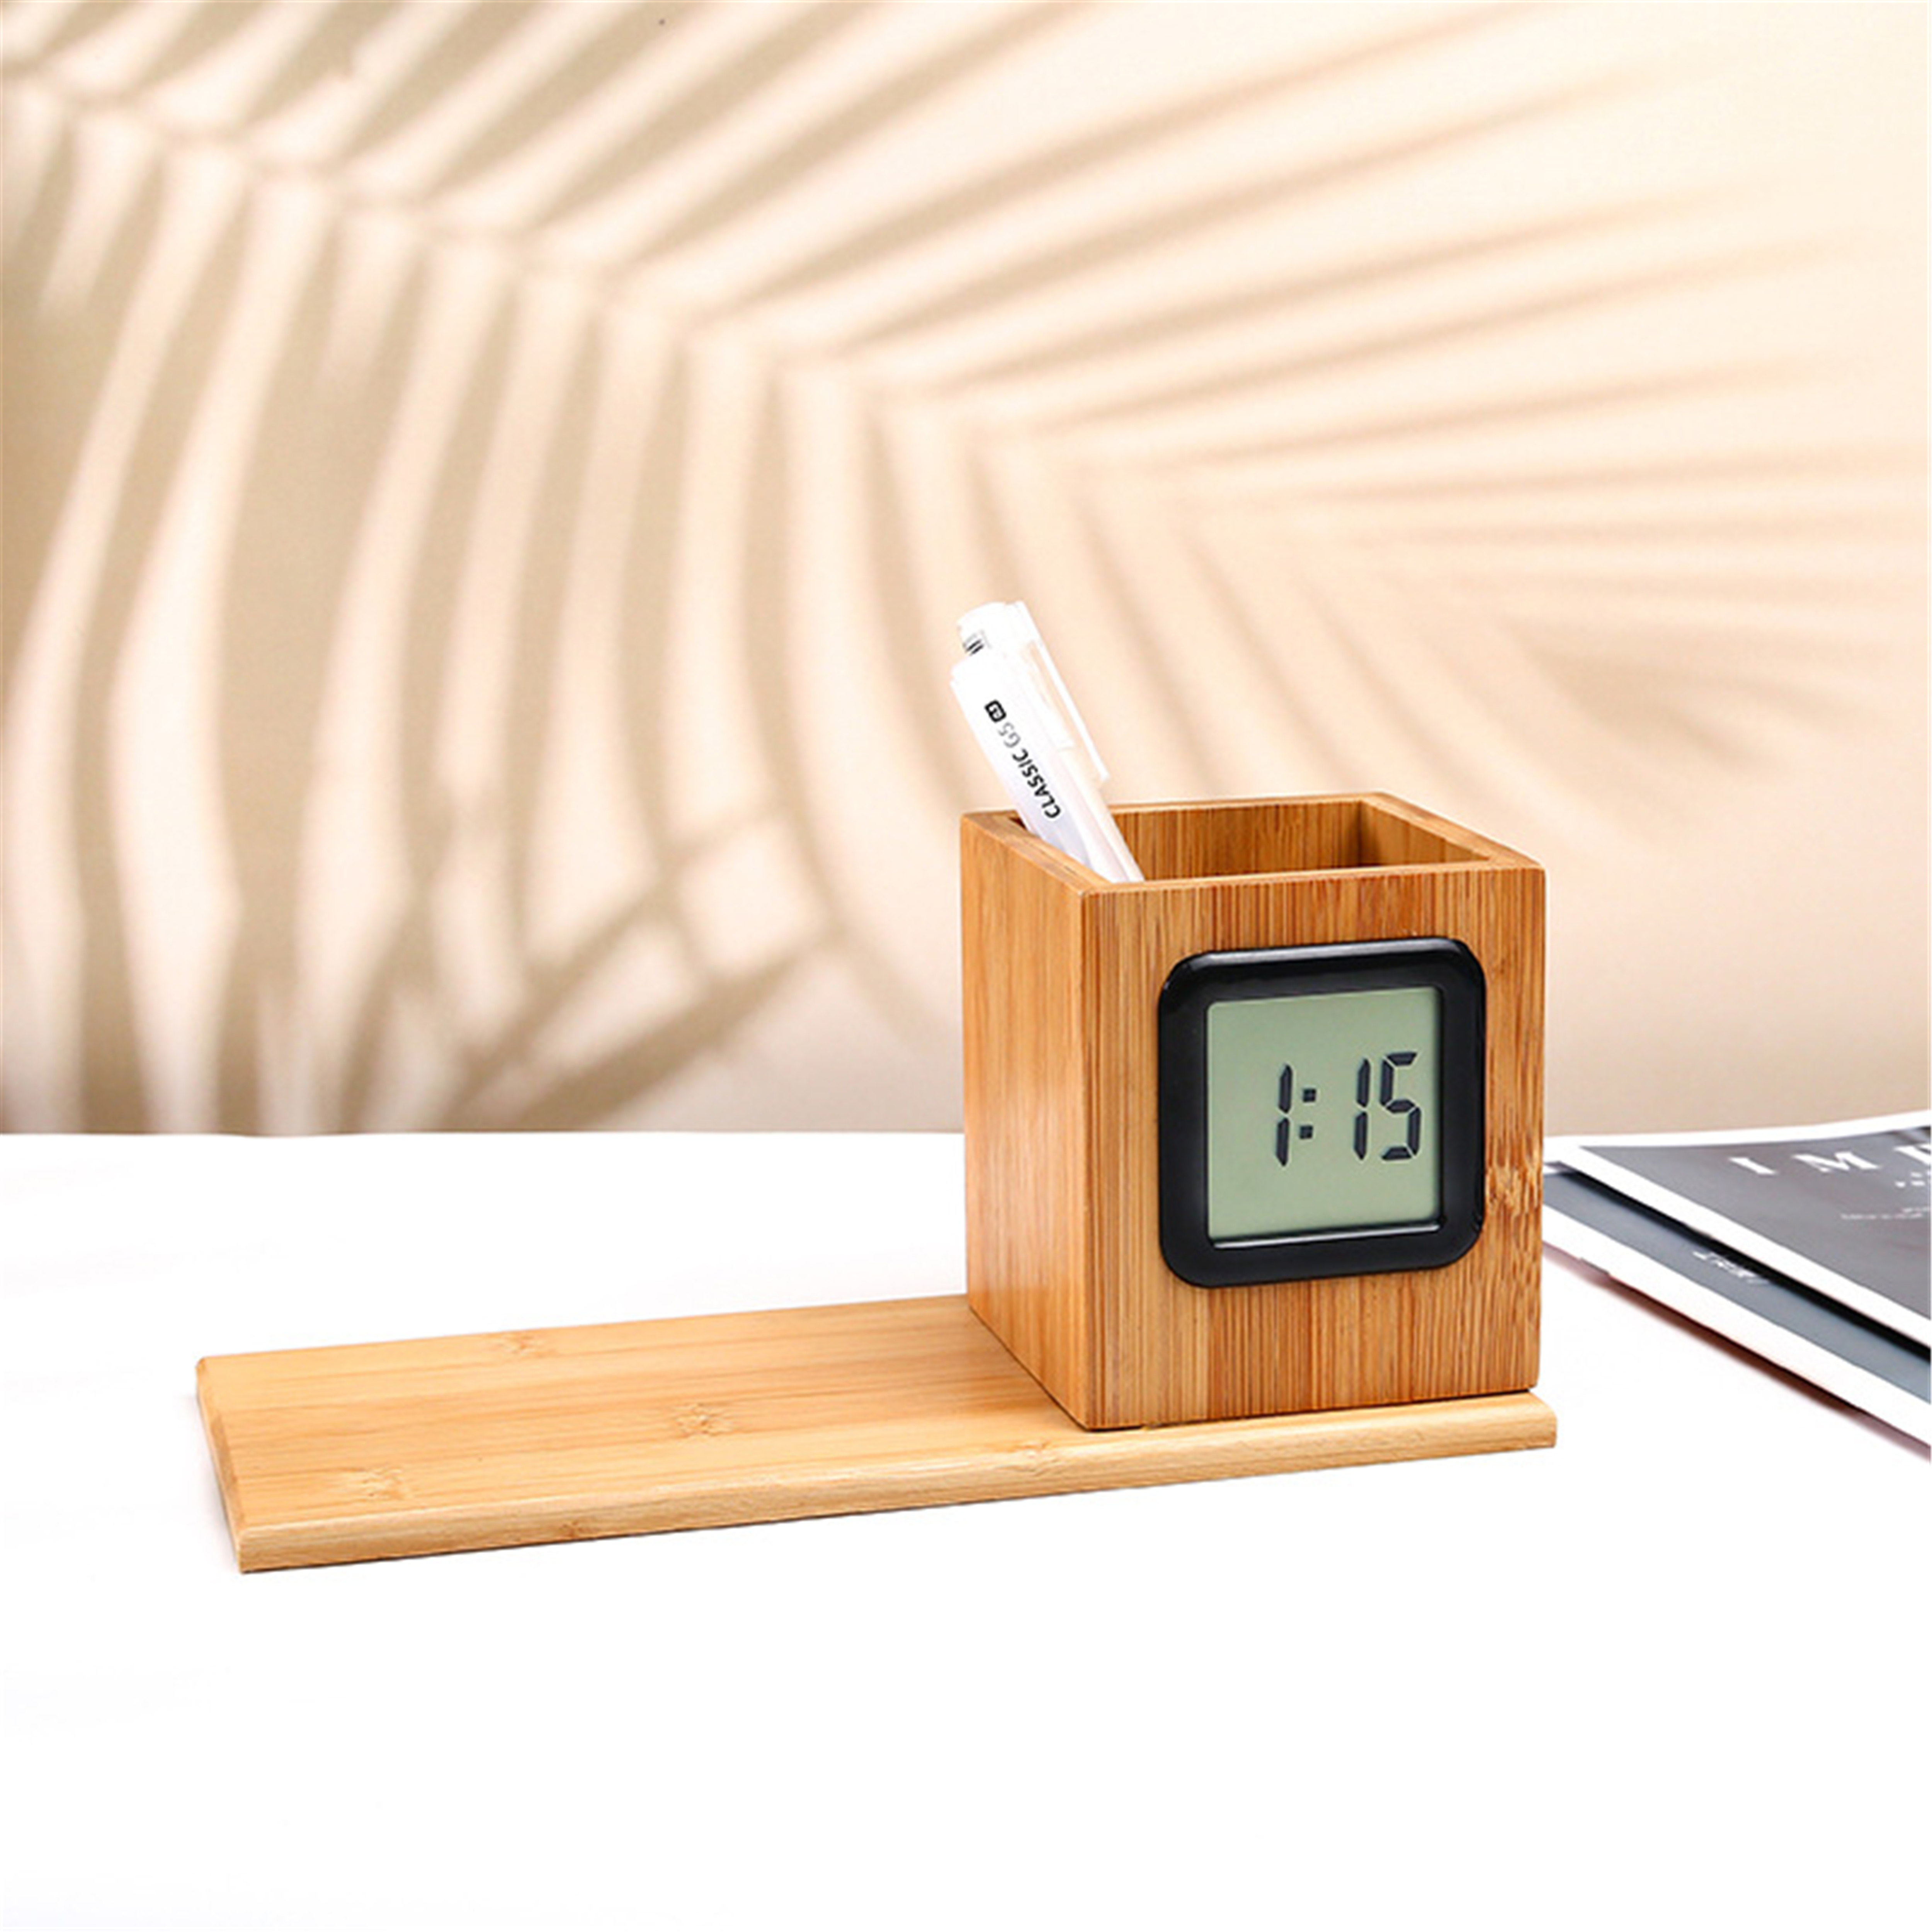 Bamboo and wood pen container clock decoration creativity simple student book desktop wooden digital display pen container storage box clock